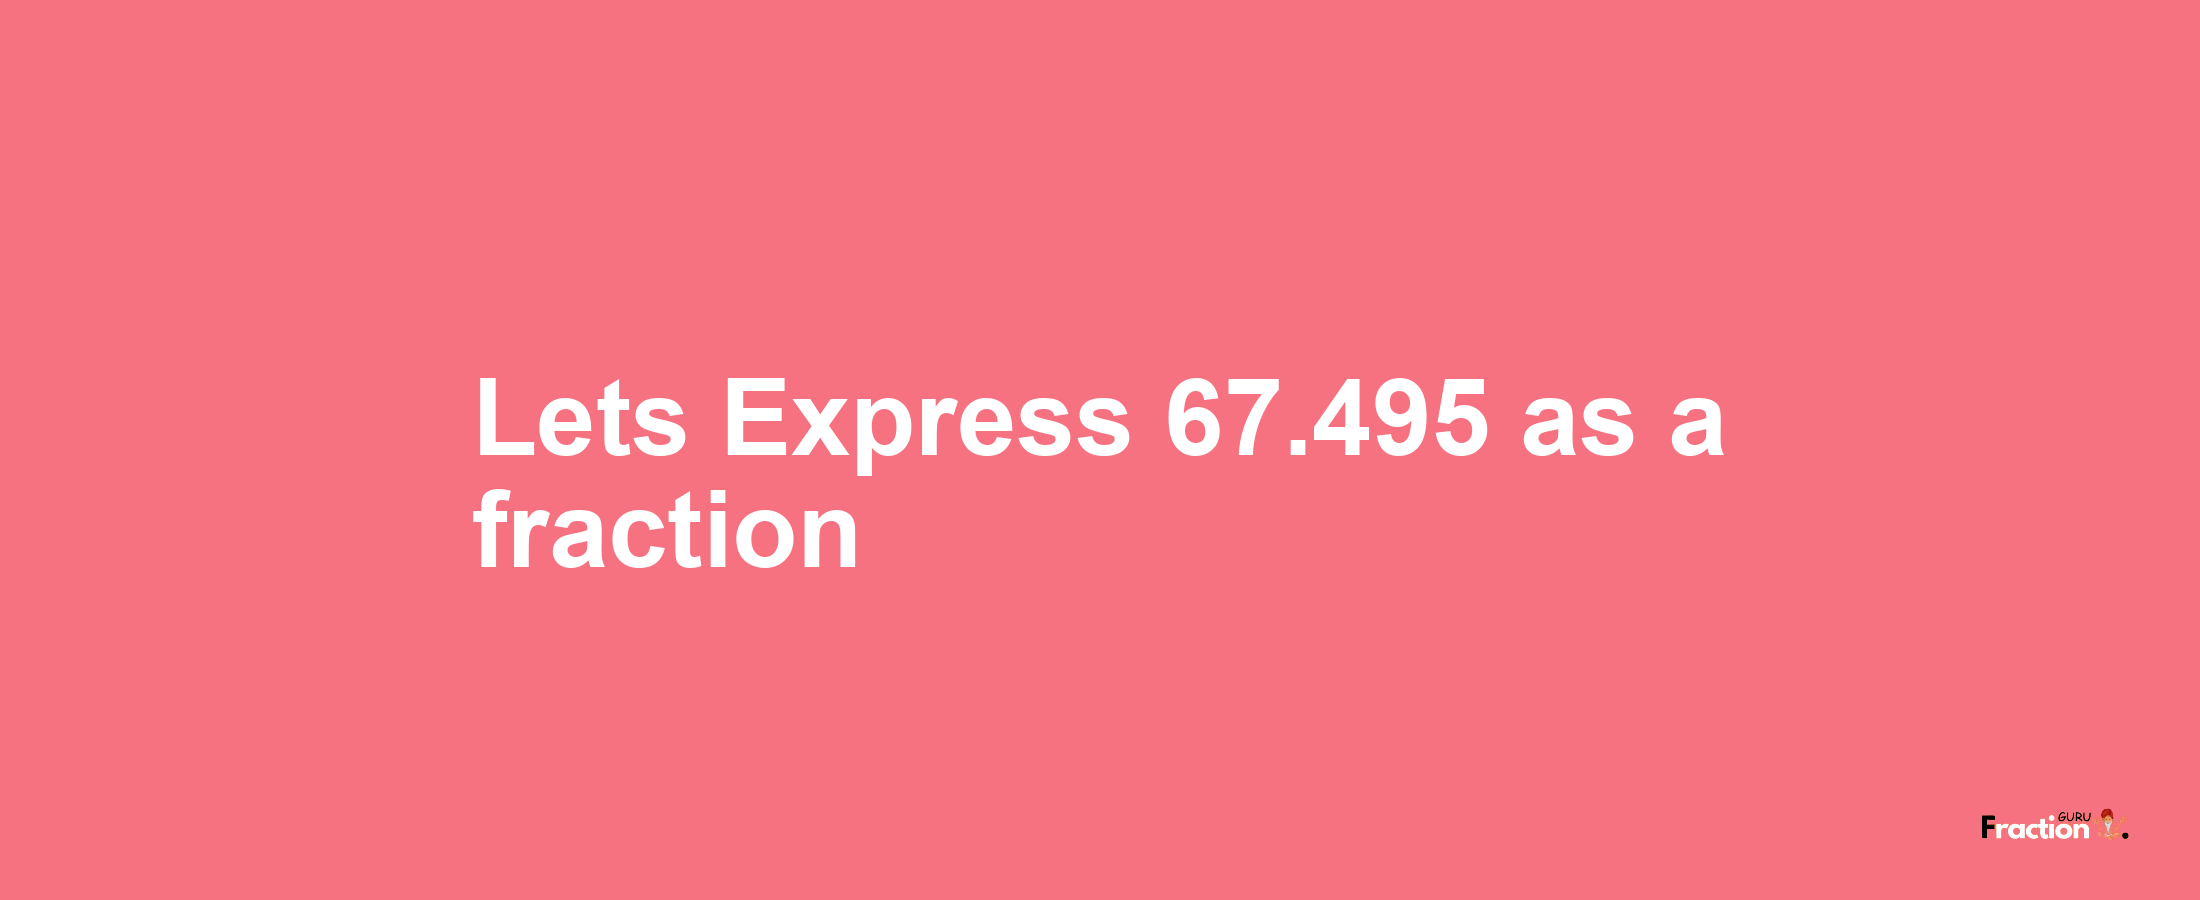 Lets Express 67.495 as afraction